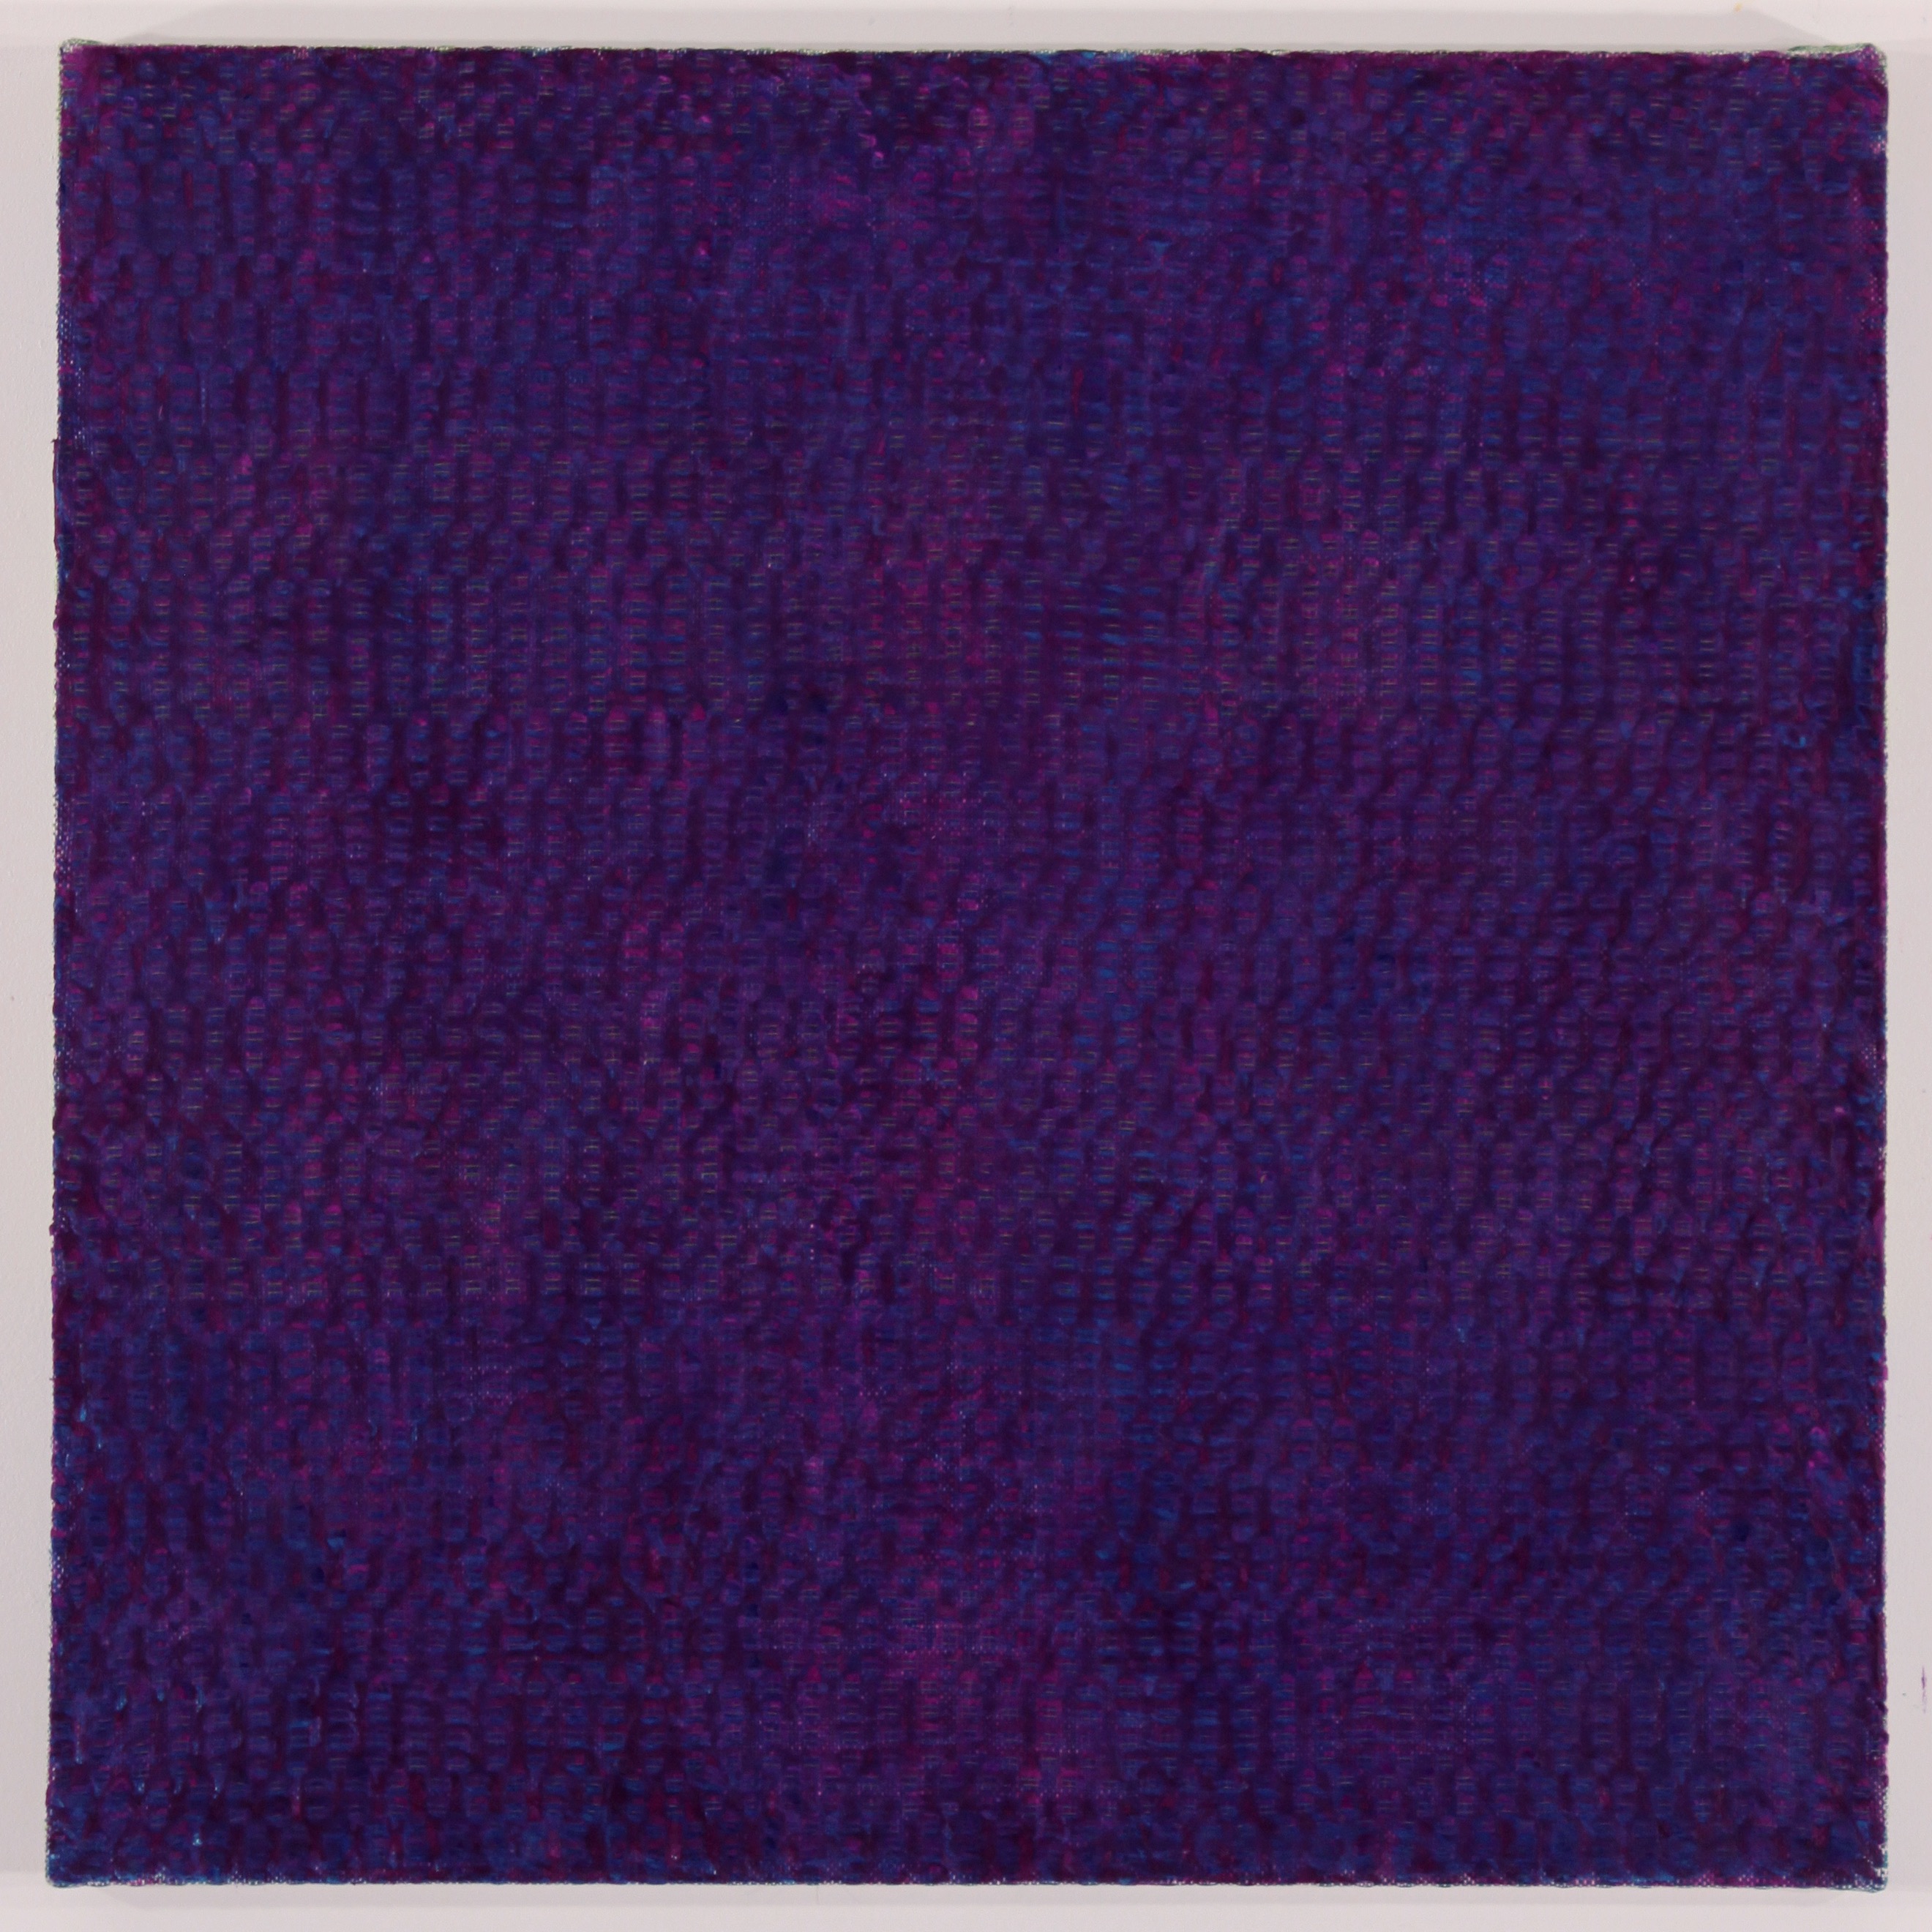 Anders Knutsson: “Promise Me Violet”, # 20, 2015